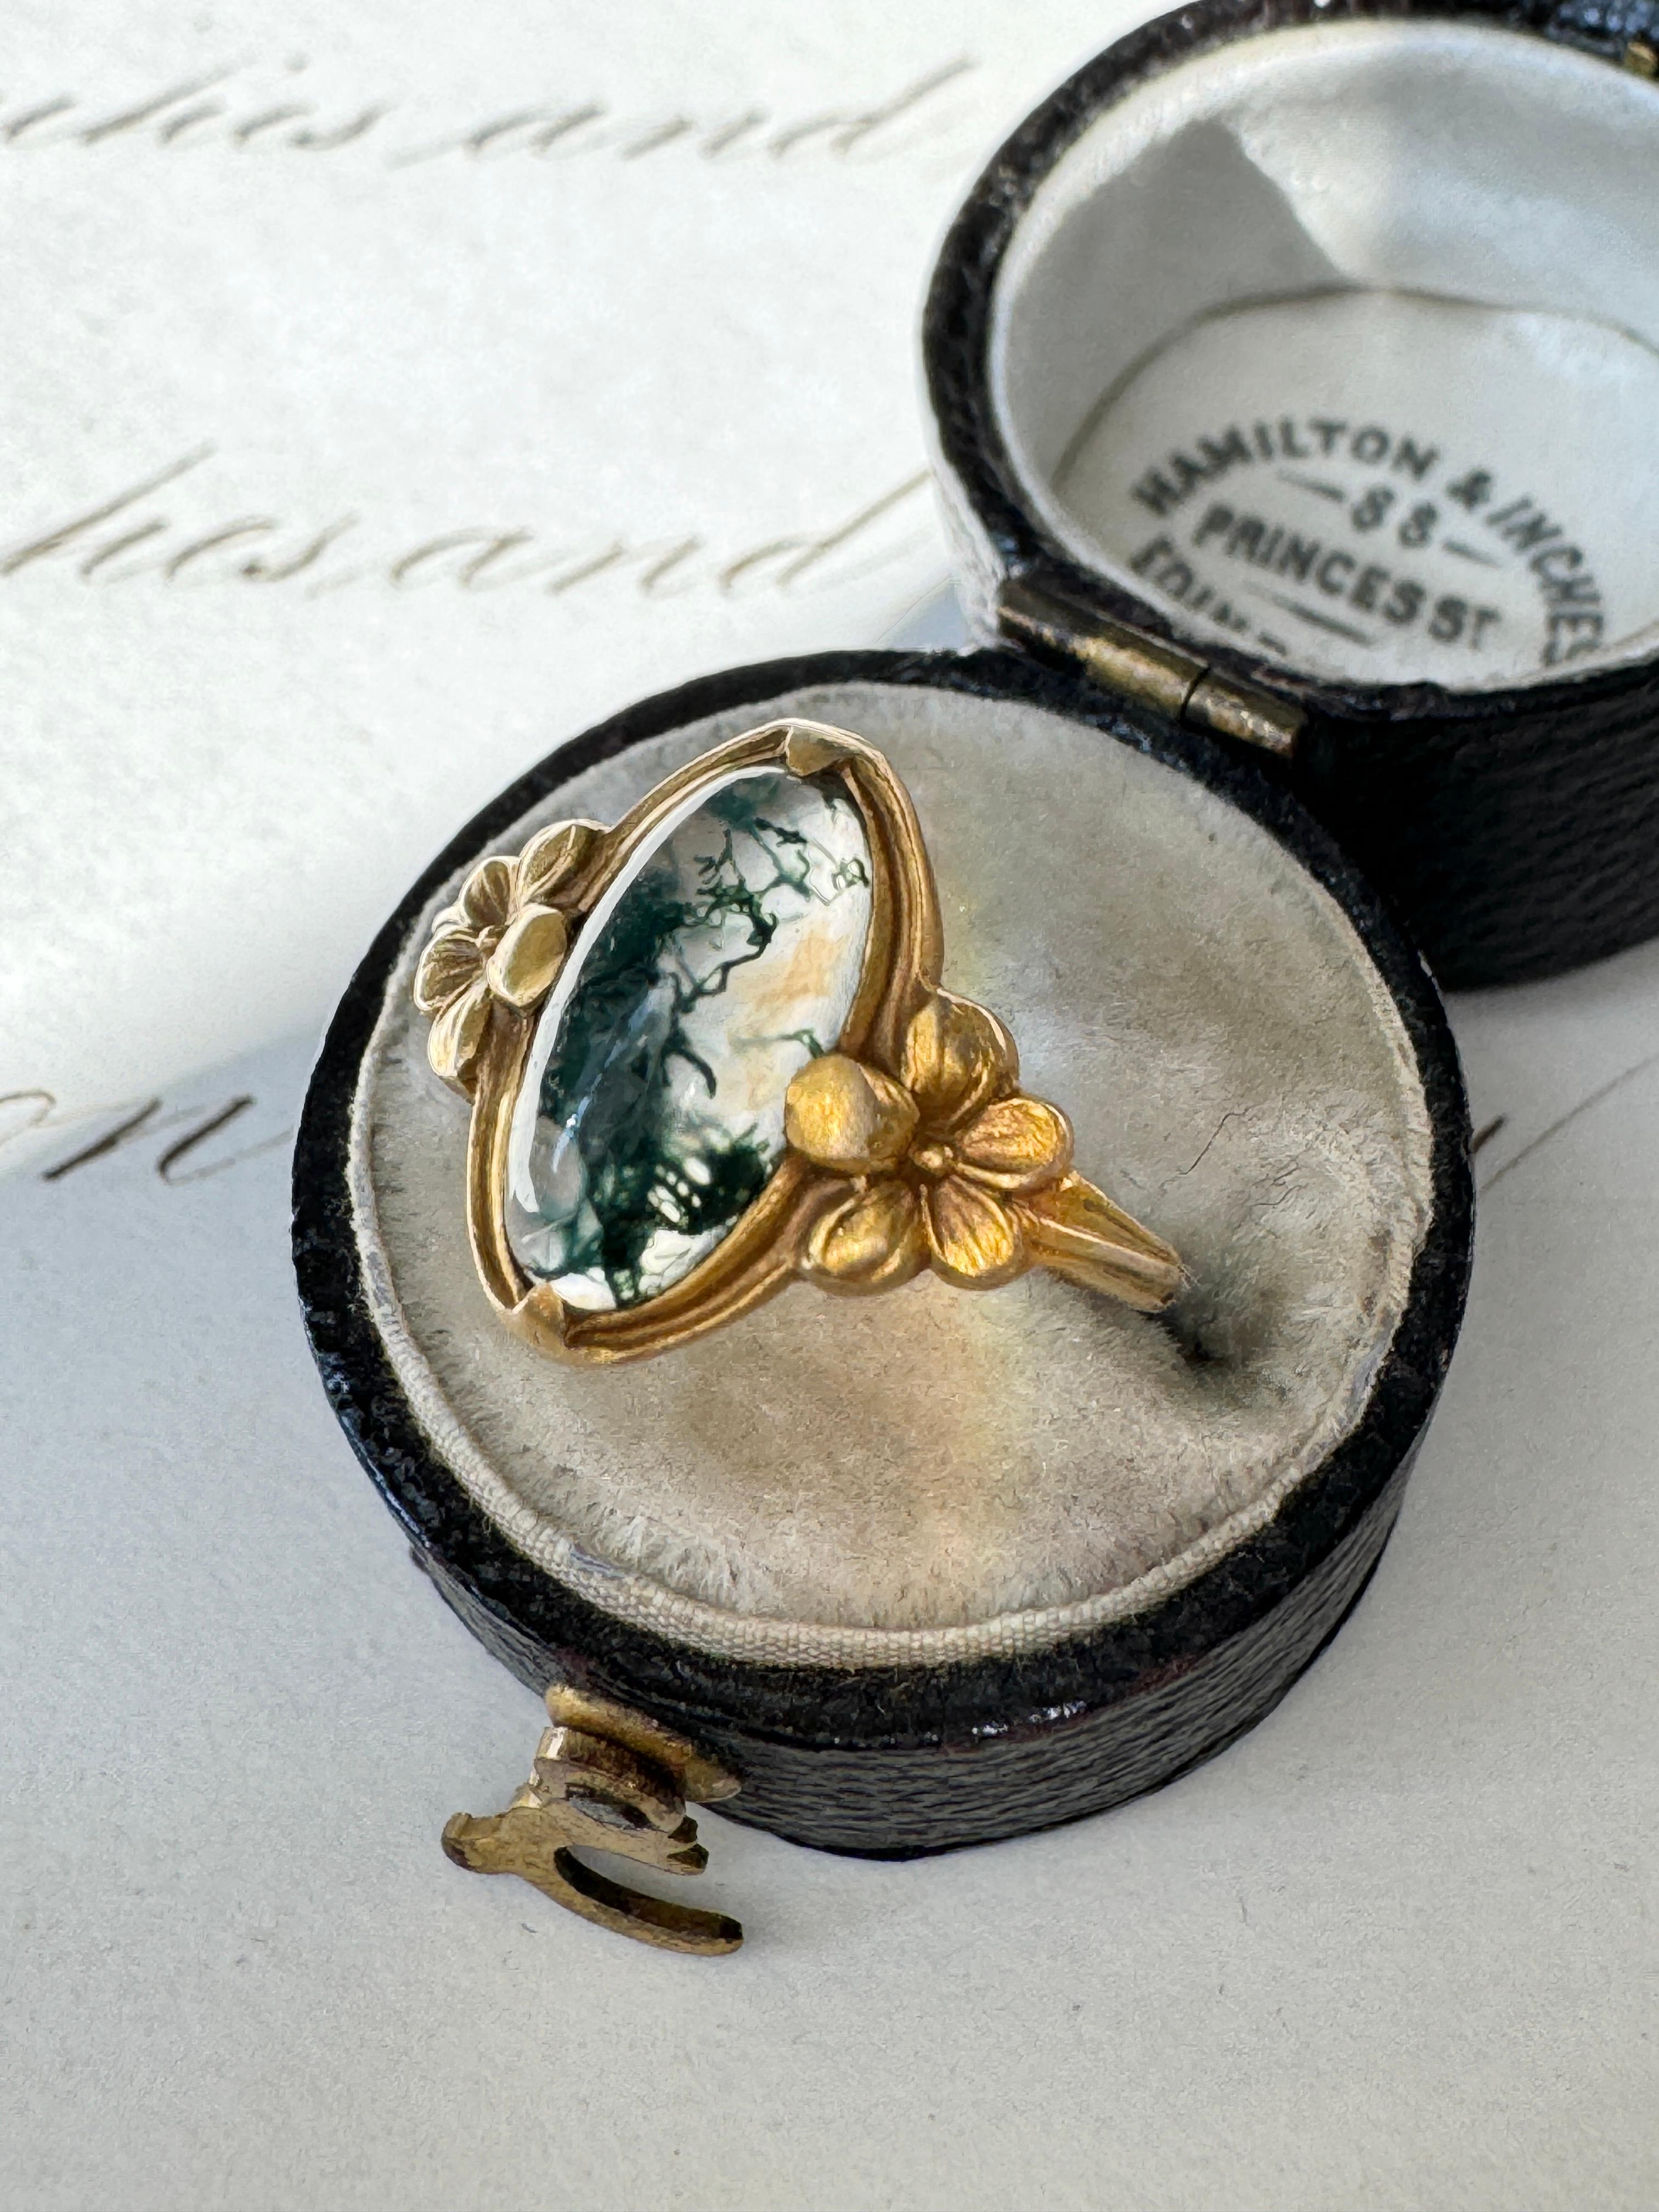 This sweet little Art Nouveau pinky ring by Jones & Woodland Co. of Newark, NJ features an elongated moss agate cabochon presented in a 14 karat gold mounting. The shoulders are artfully adorned with a pair of delicate flowers. Currently a ring size